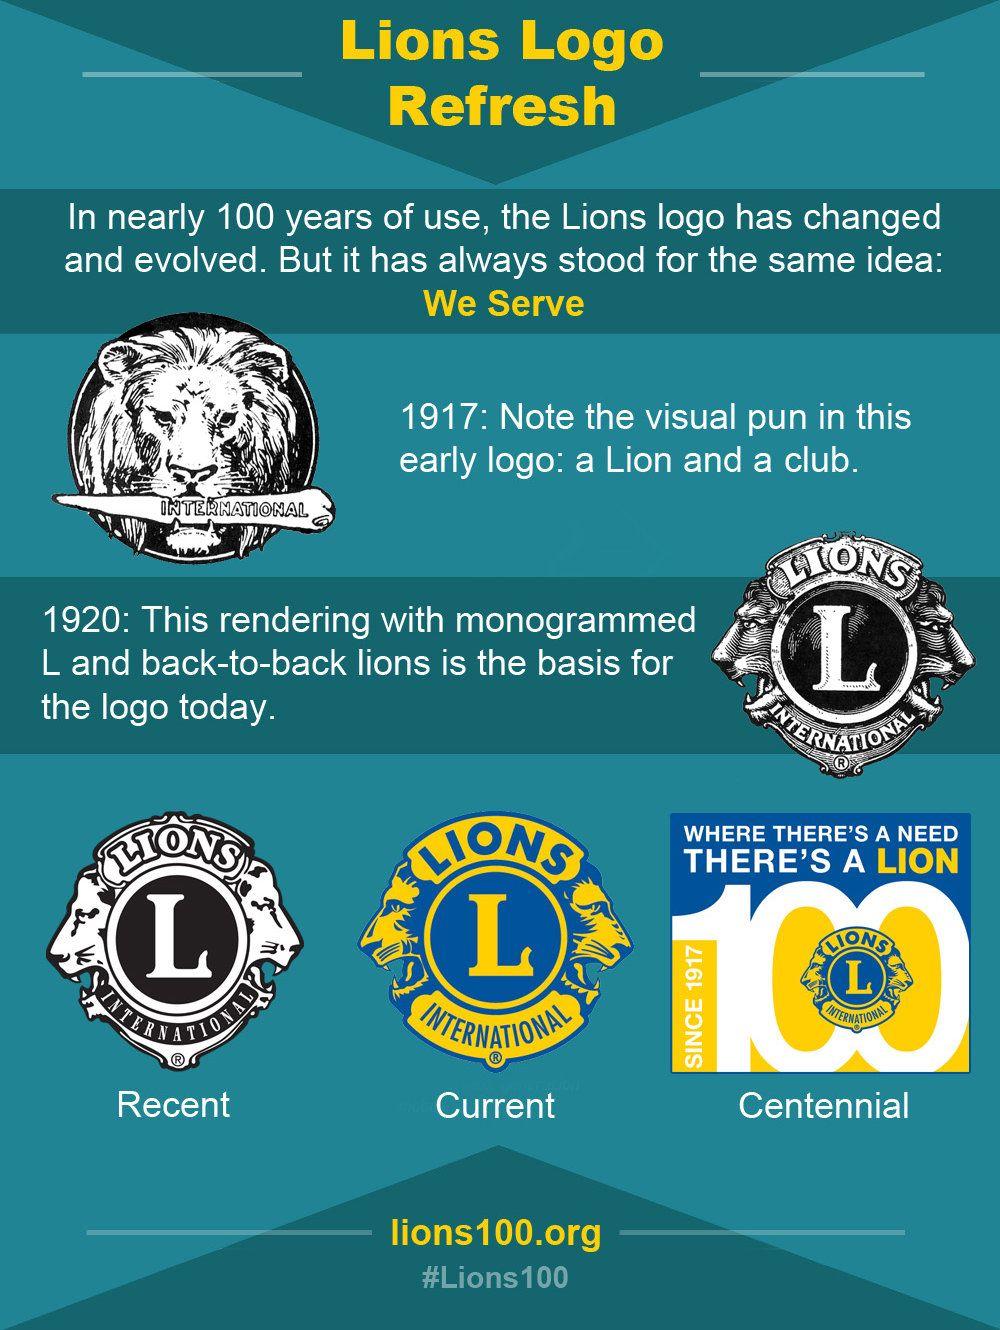 Who Has a Lion Logo - Lions Clubs | Association Name and Symbol